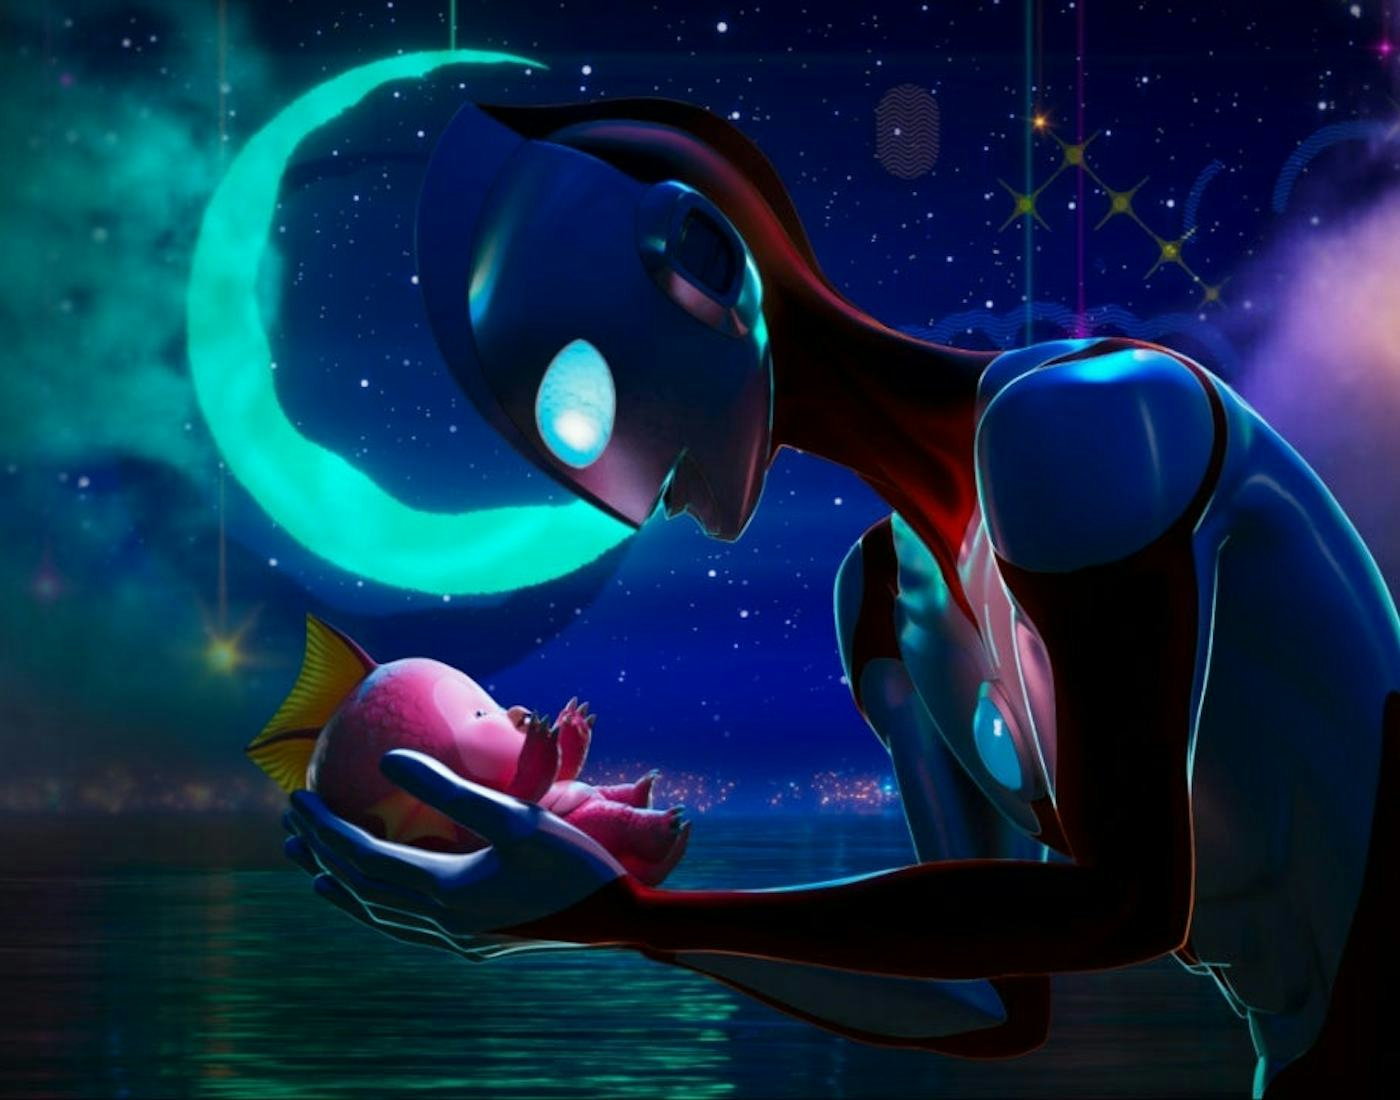 A futuristic scene where a humanoid alien holds a small, fish-like creature under a starlit sky with a large moon.